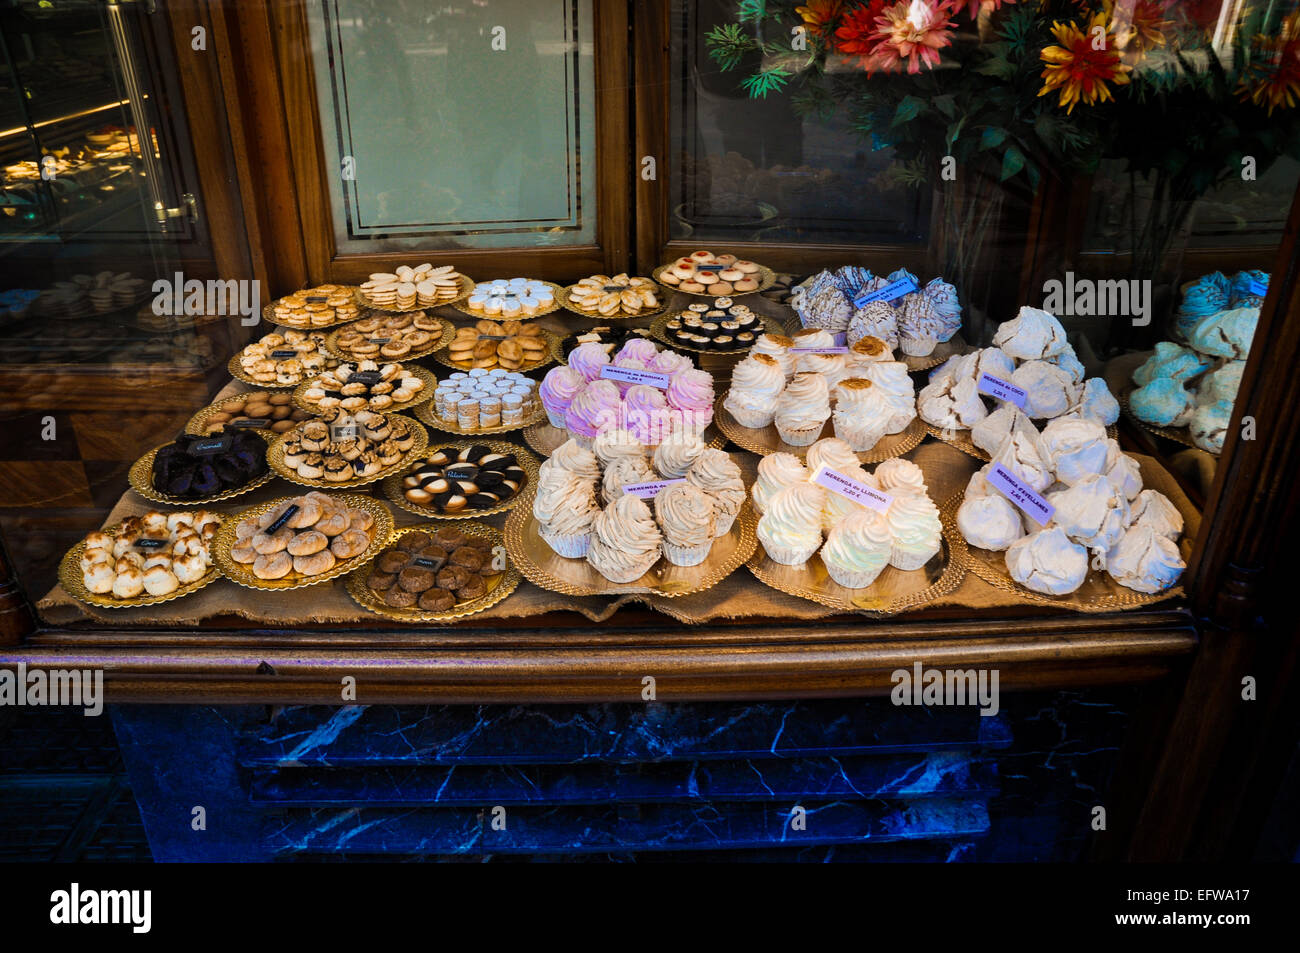 Barcelona Spain window of pastries for sale Stock Photo